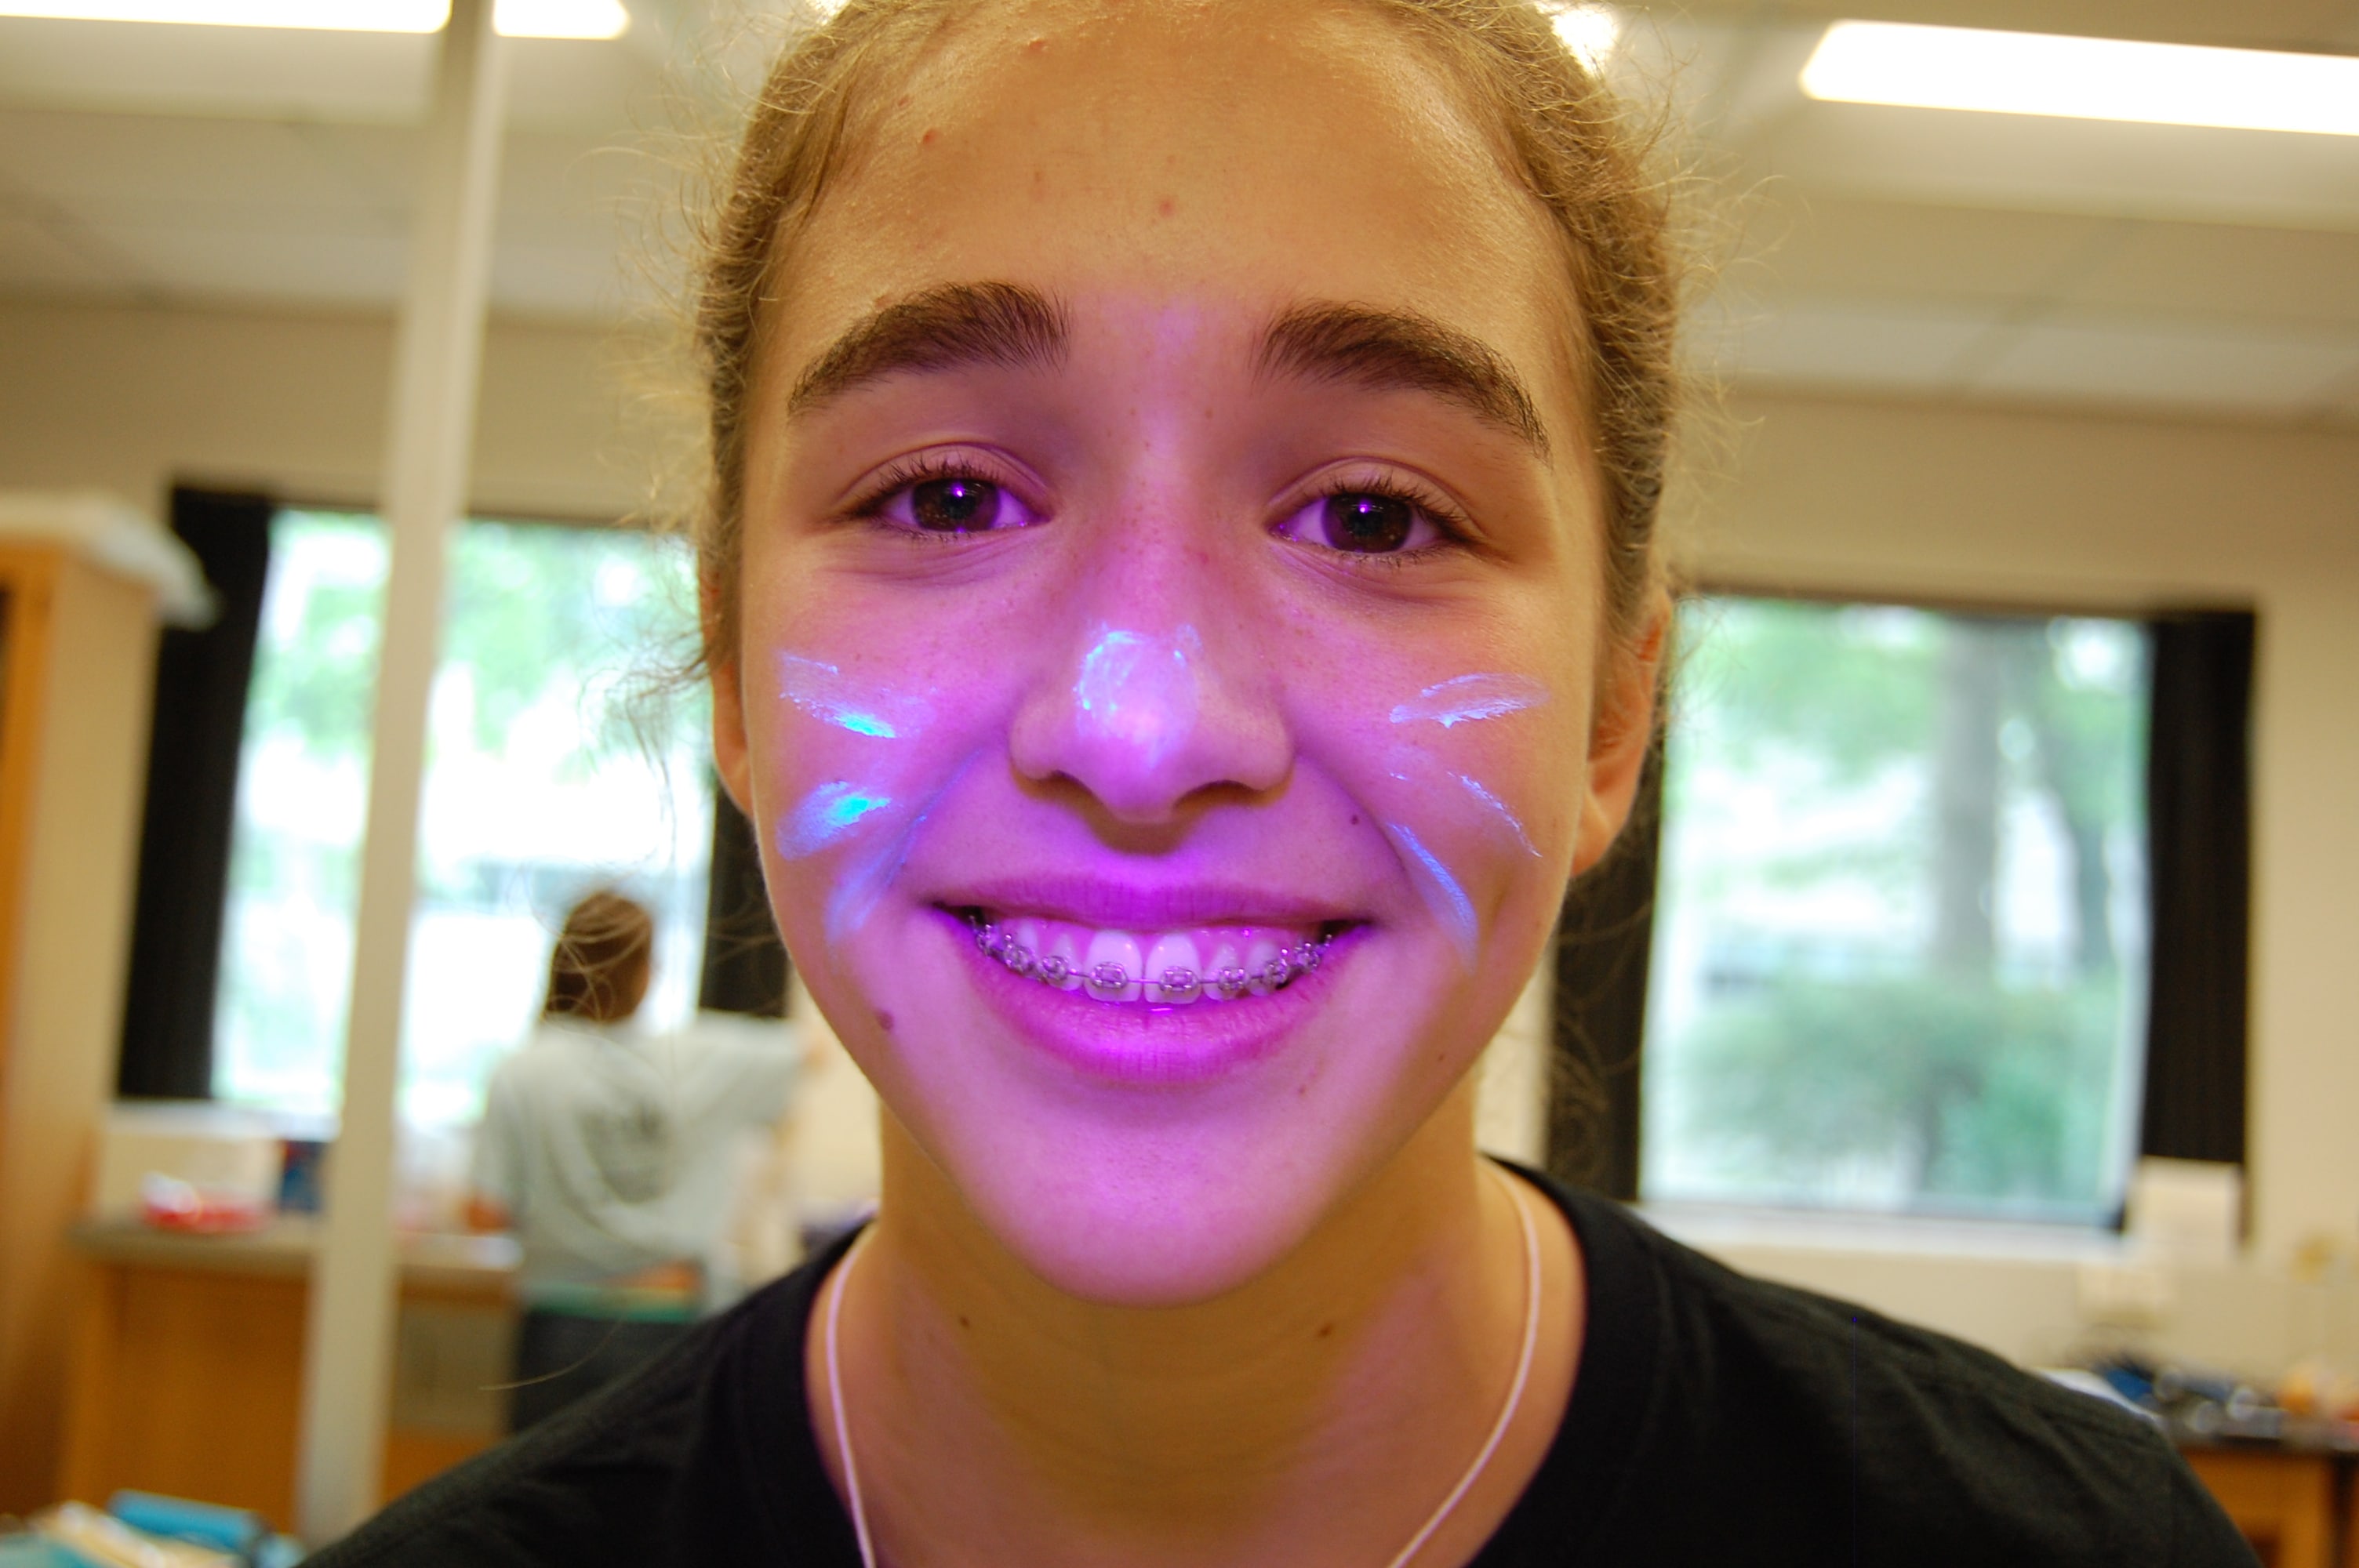 Close up of smiling young girl with pink glowing paint on her face.